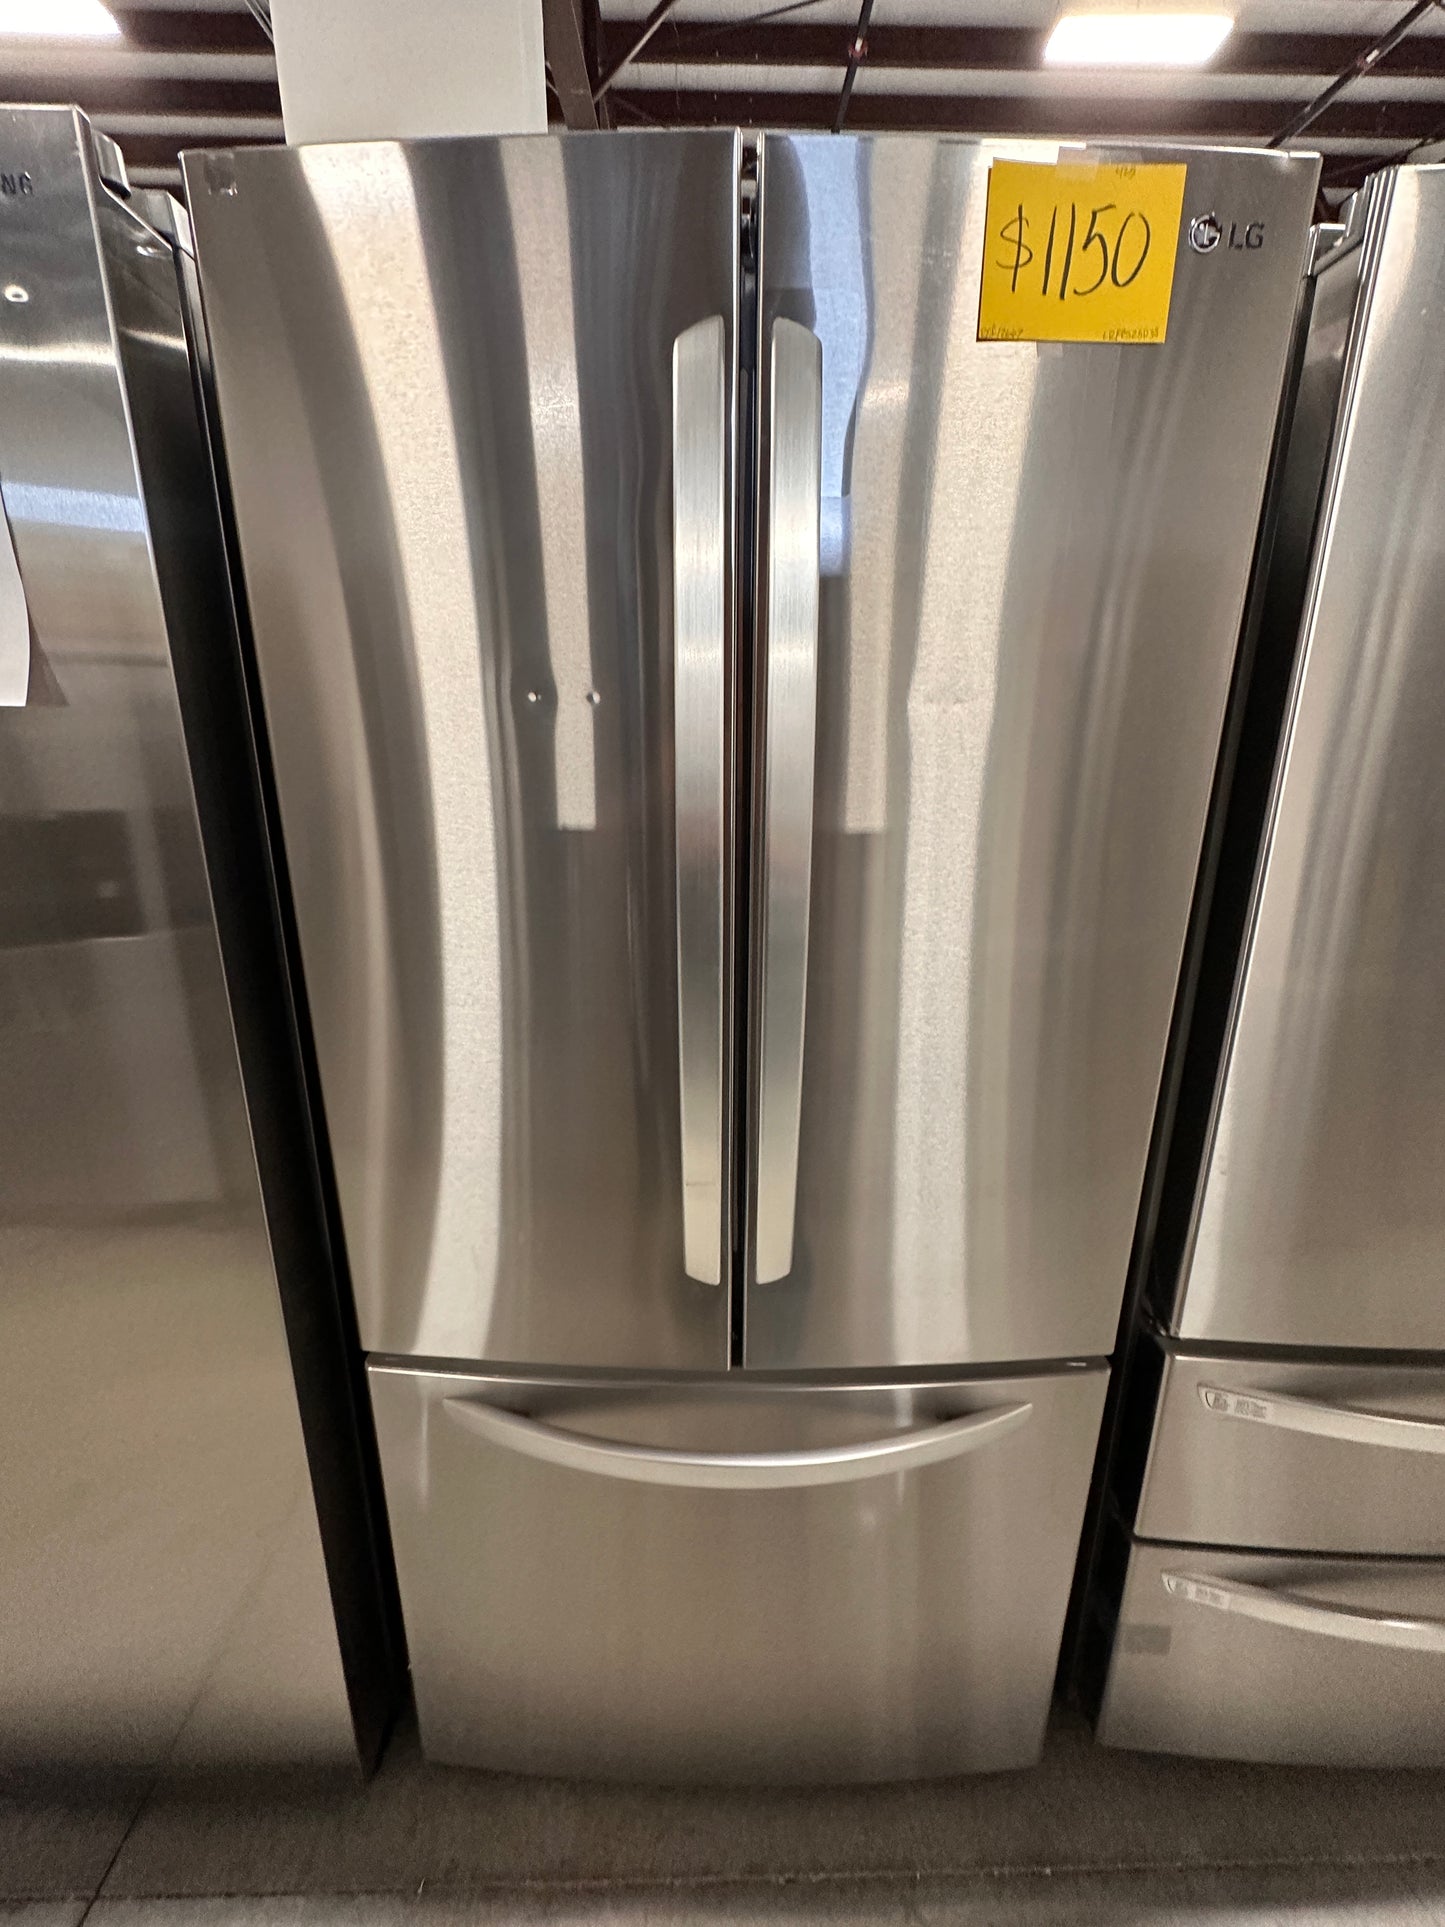 NEW LG REFRIGERATOR with ICE MAKER - REF12667 LRFCS25D3S